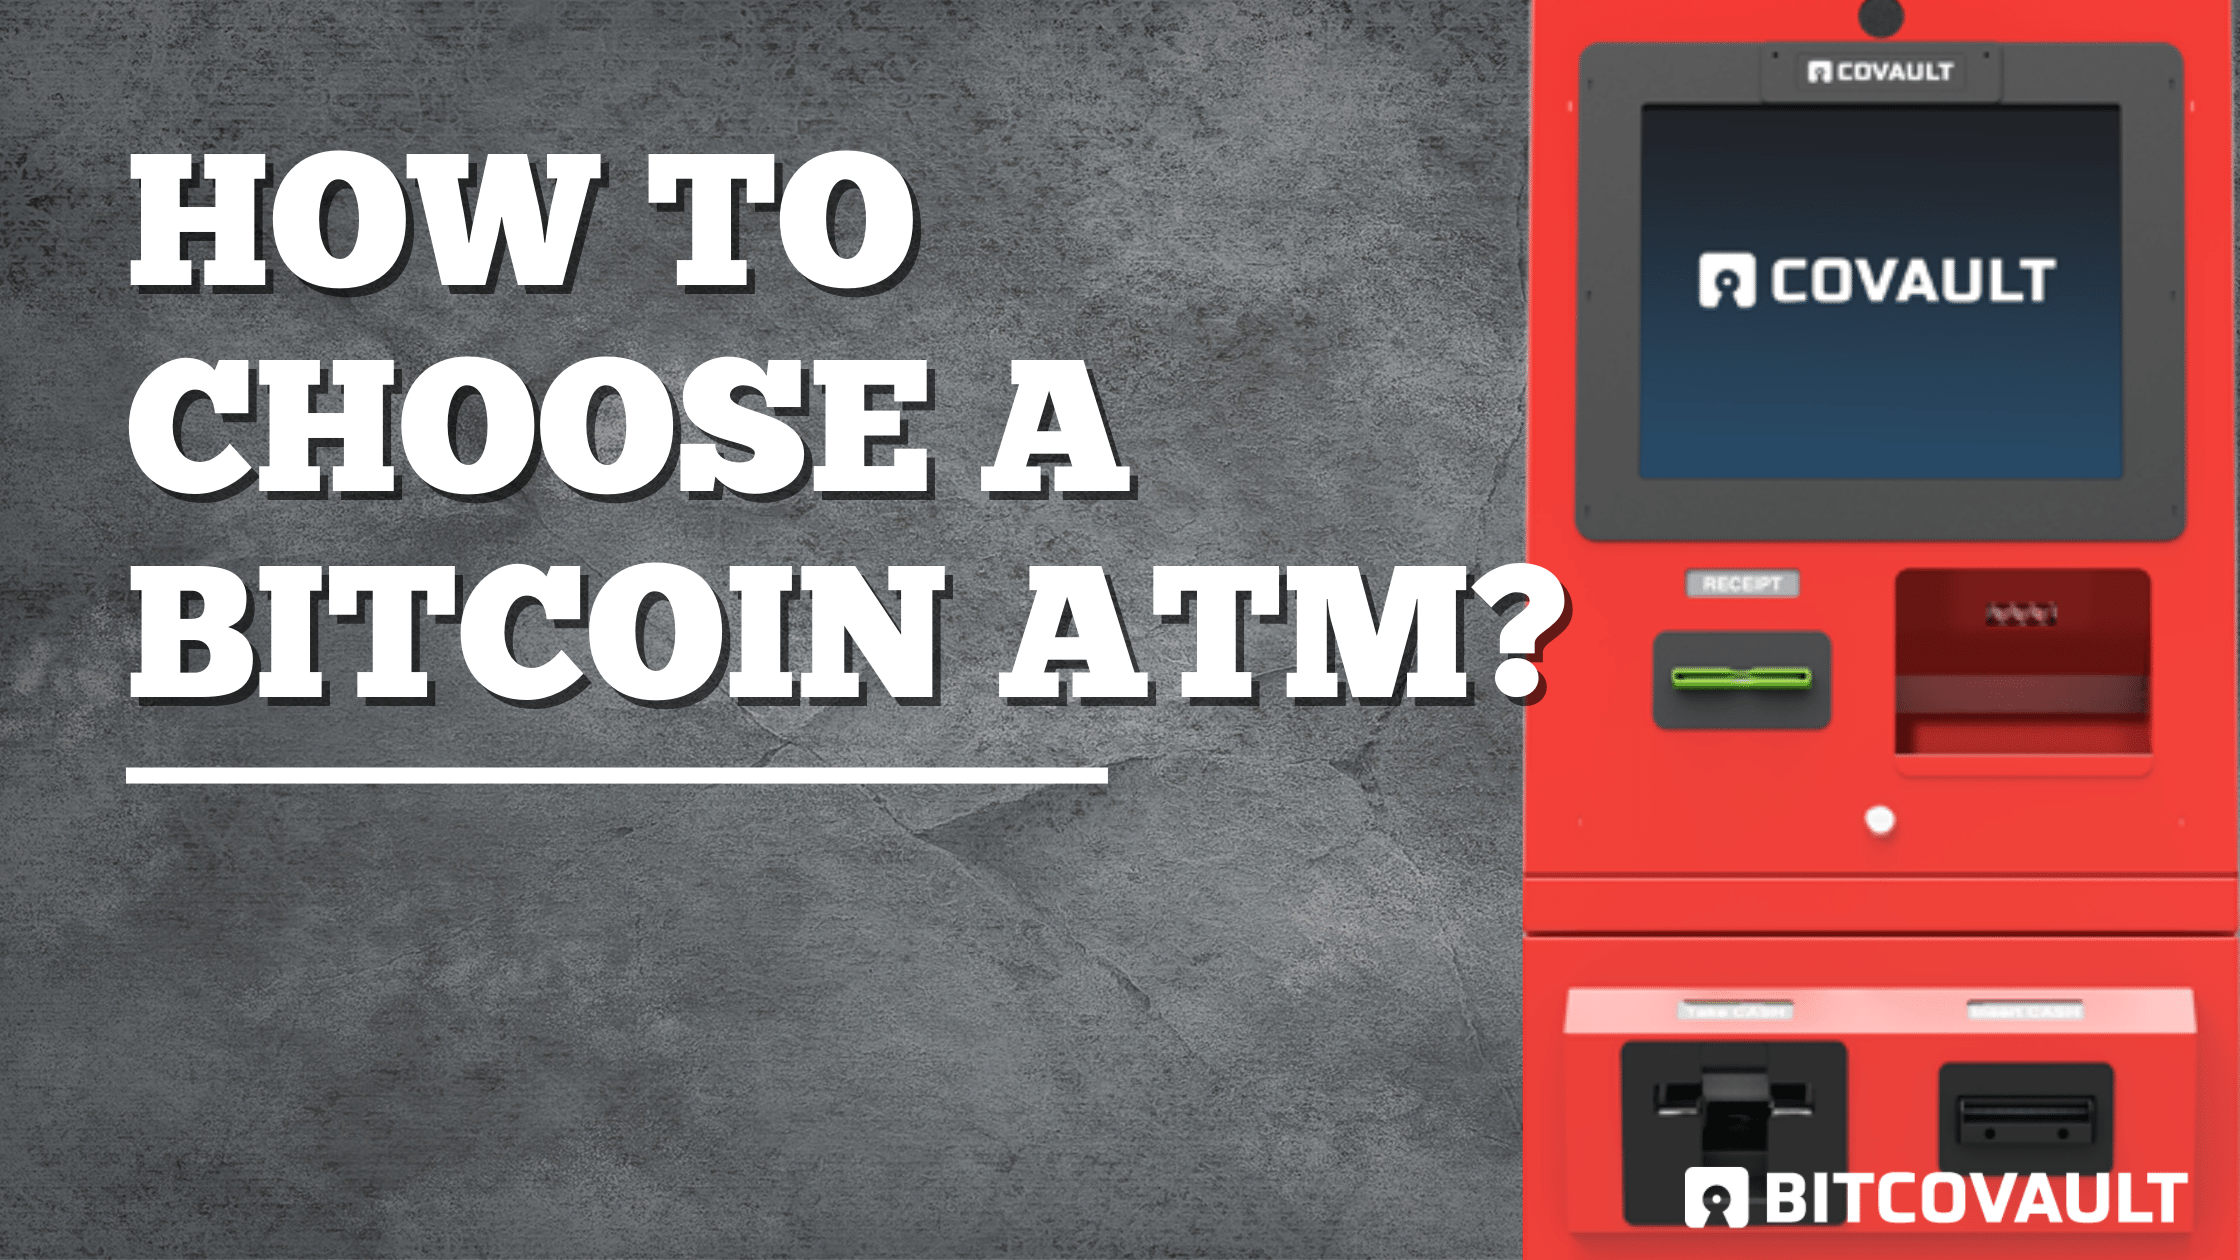 How to choose a Bitcoin ATM